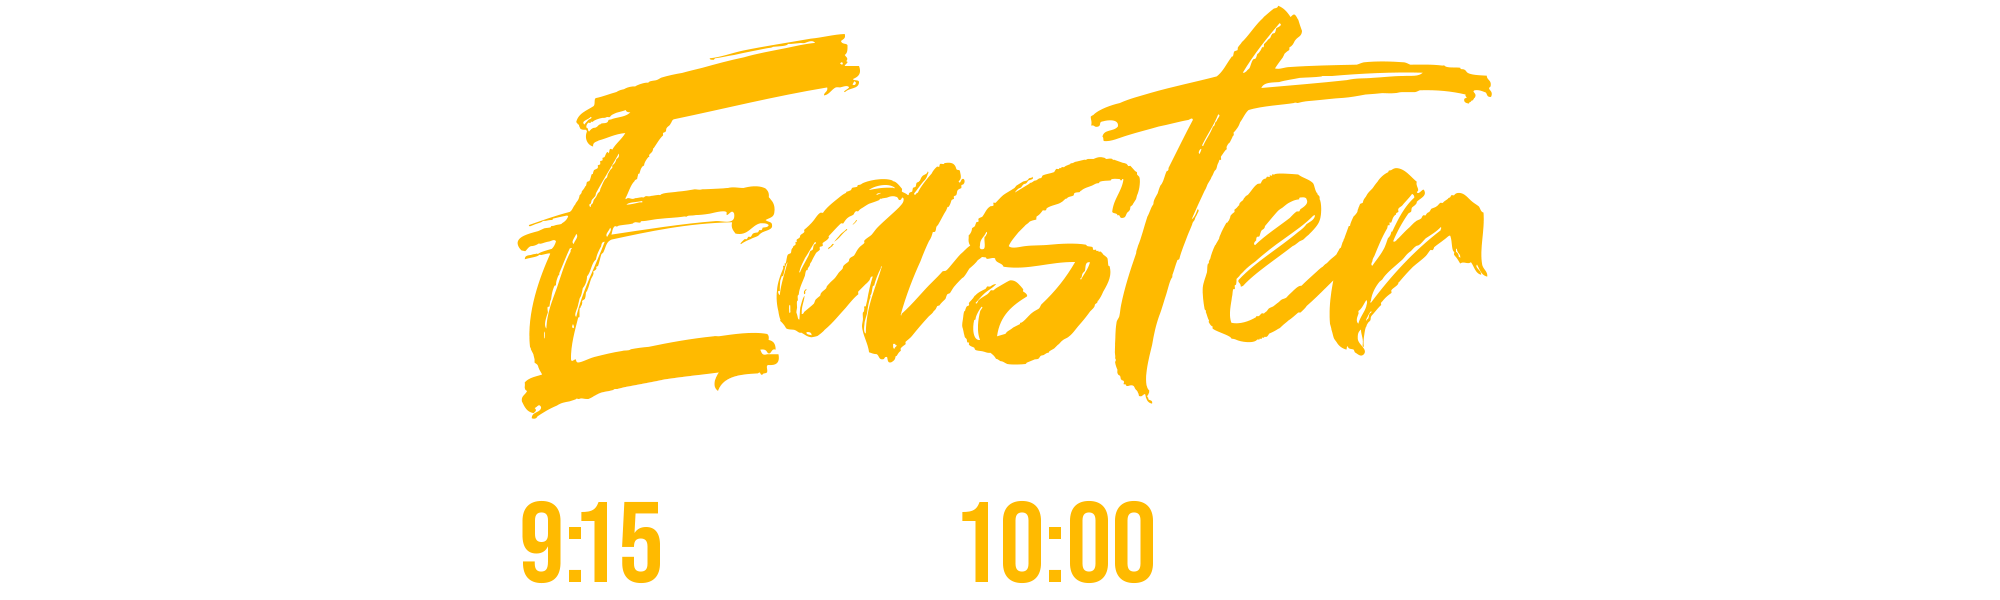 Easter_Graphic_no_bg.png